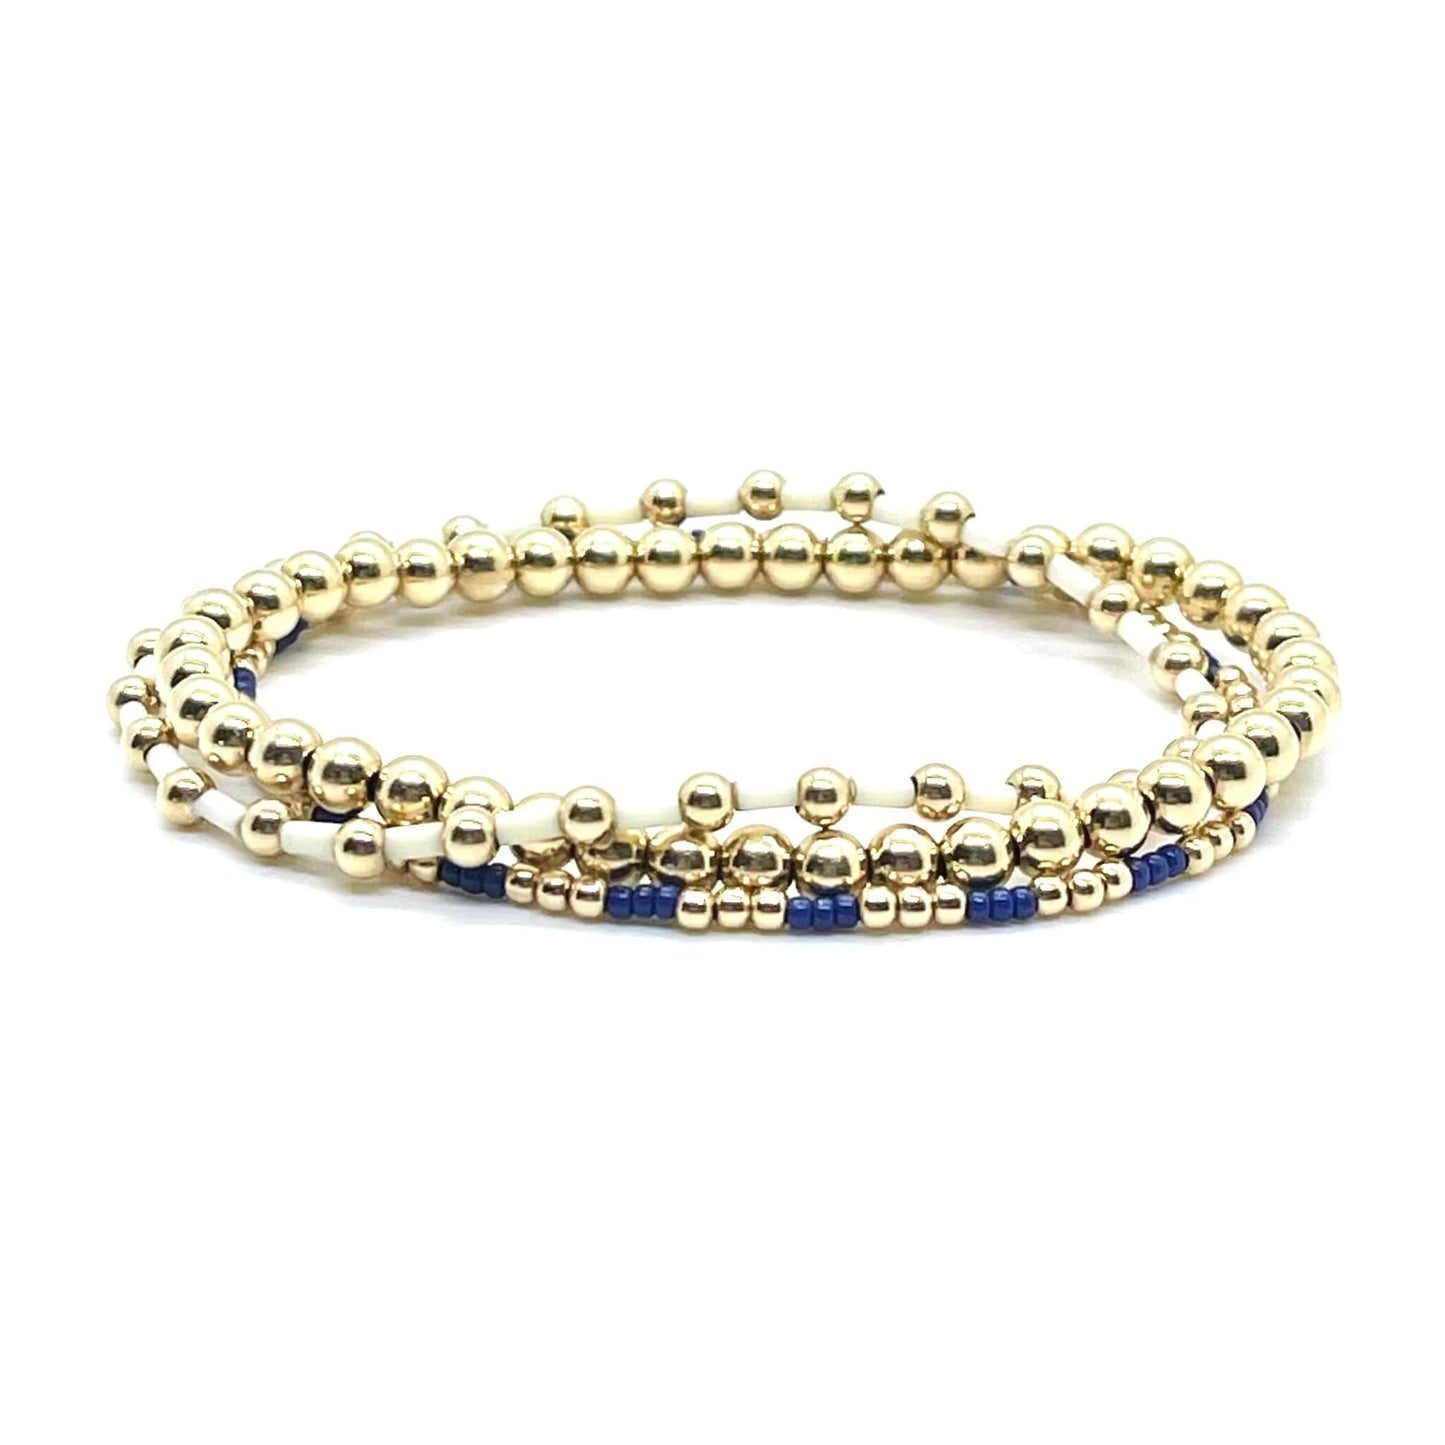 14K gold filled beaded stretch bracelets with navy and ivory seed beads. Stack of 3. 